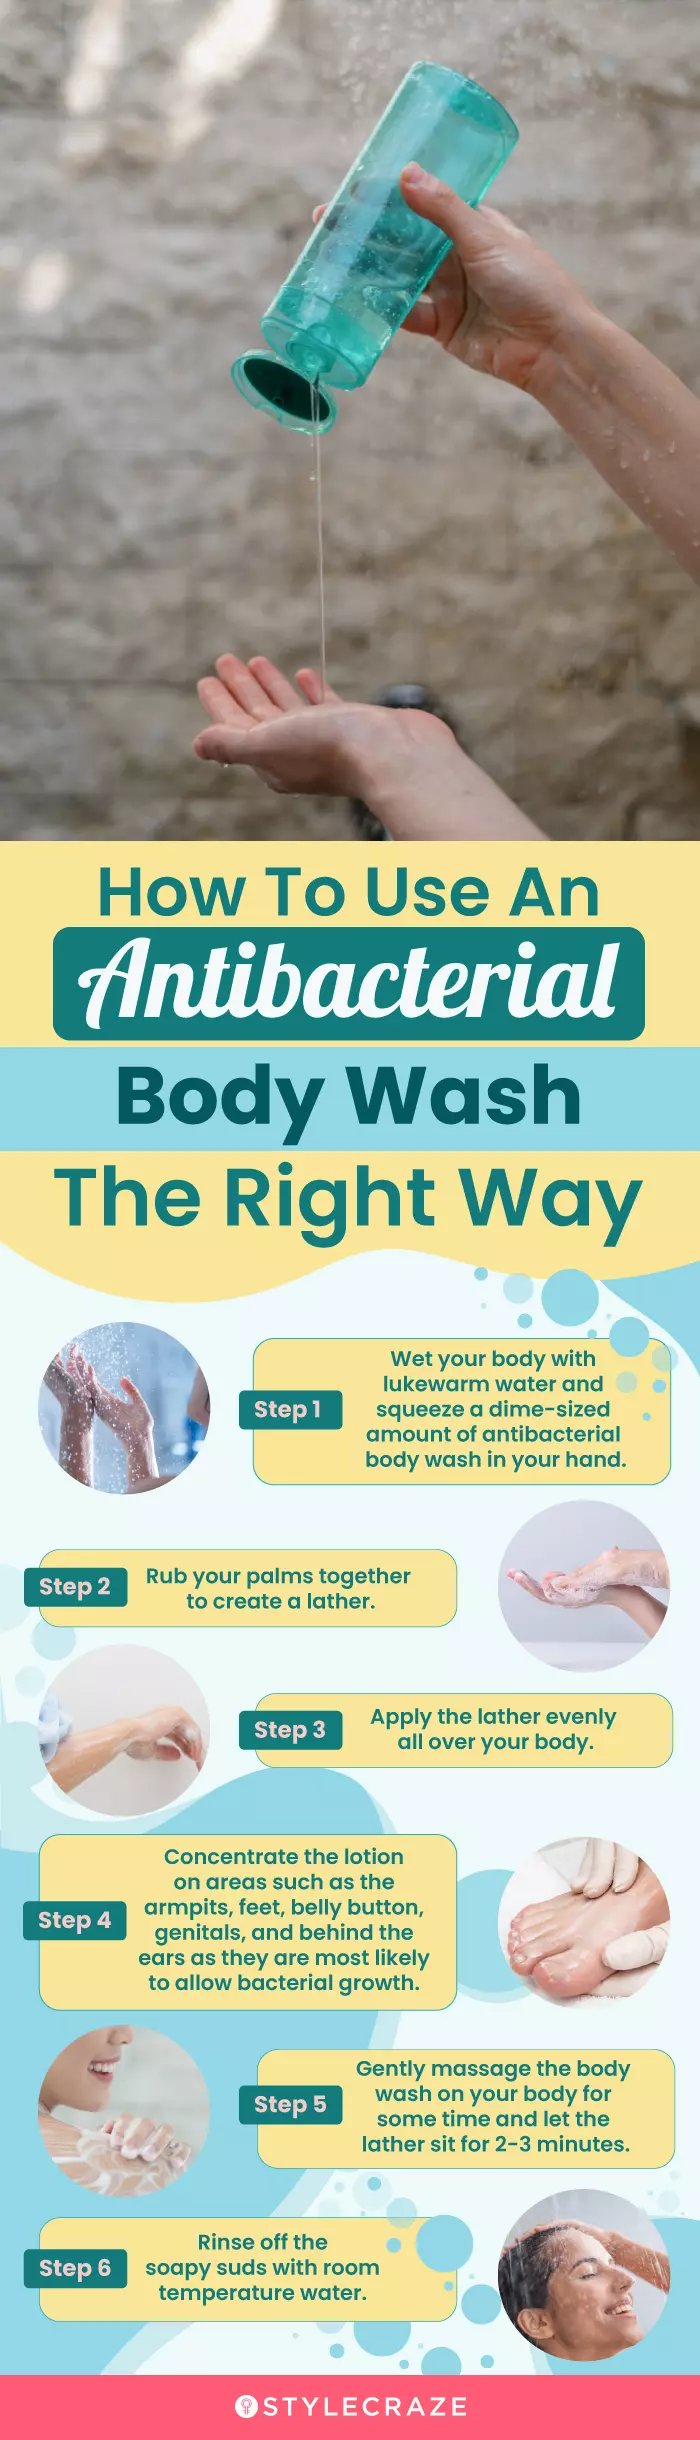 How To Use An Antibacterial Body Wash The Right Way (infographic)